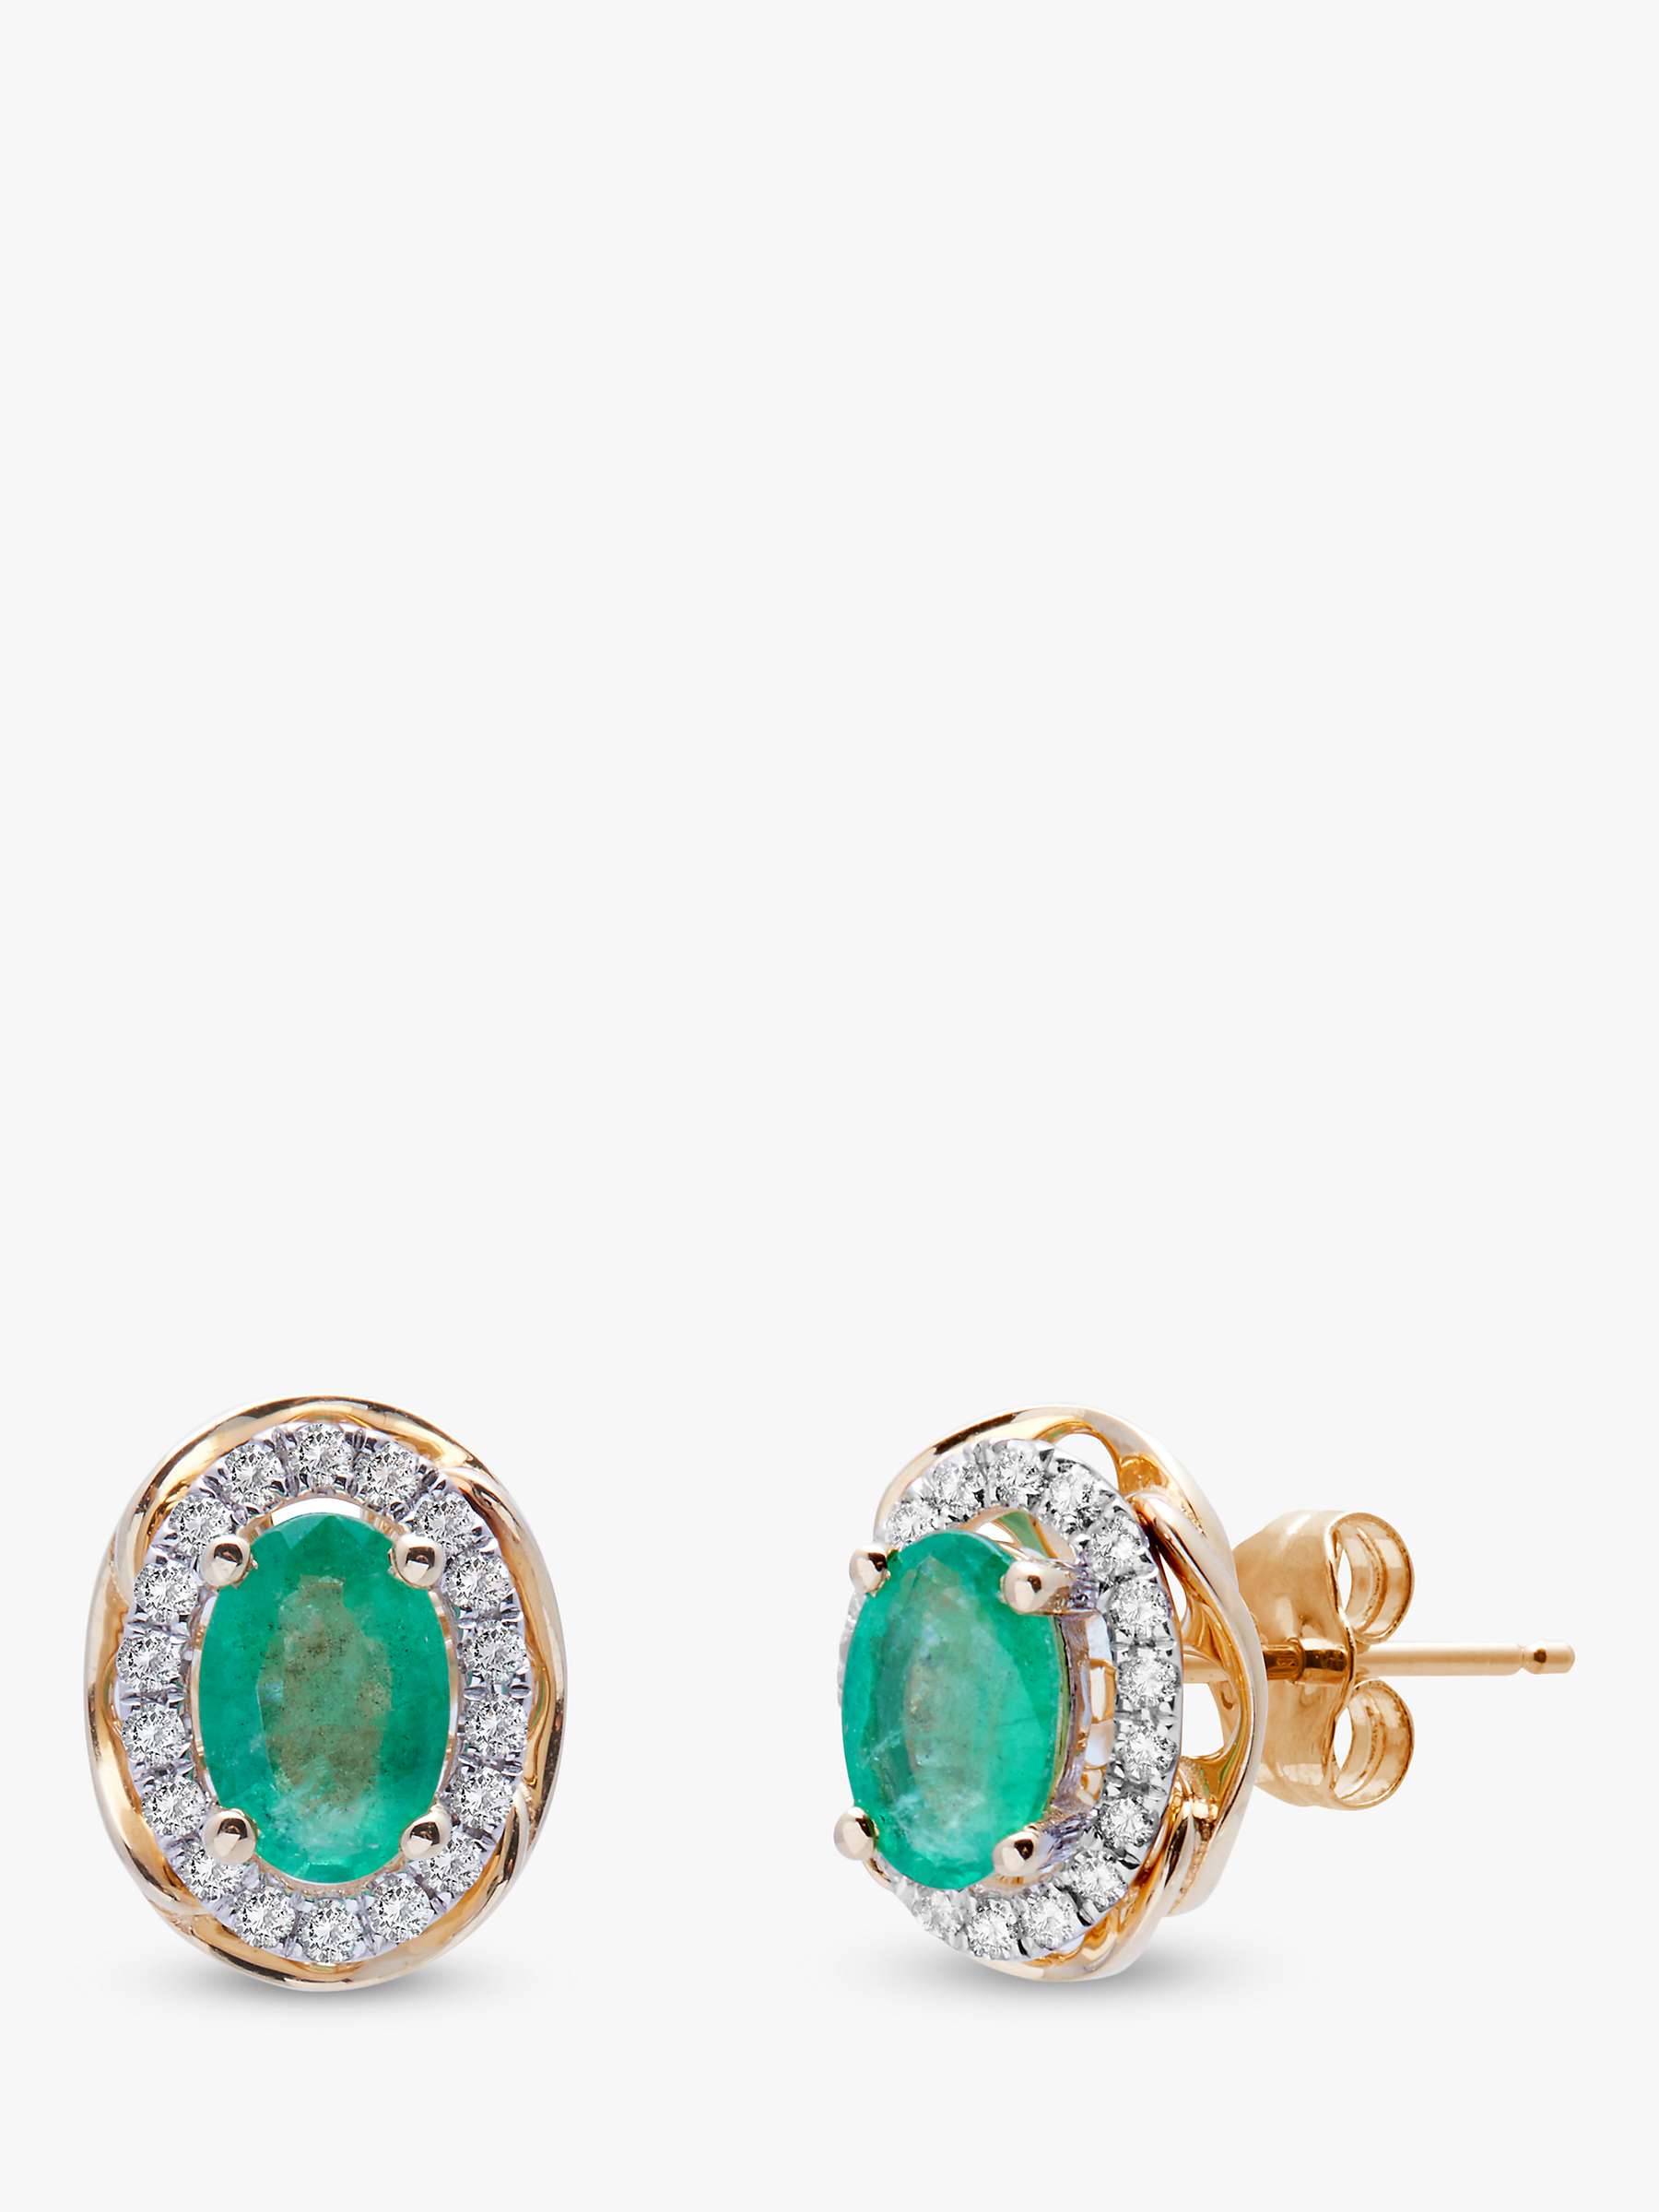 Buy A B Davis 9ct Gold Emerald and Diamond Oval Stud Earrings Online at johnlewis.com